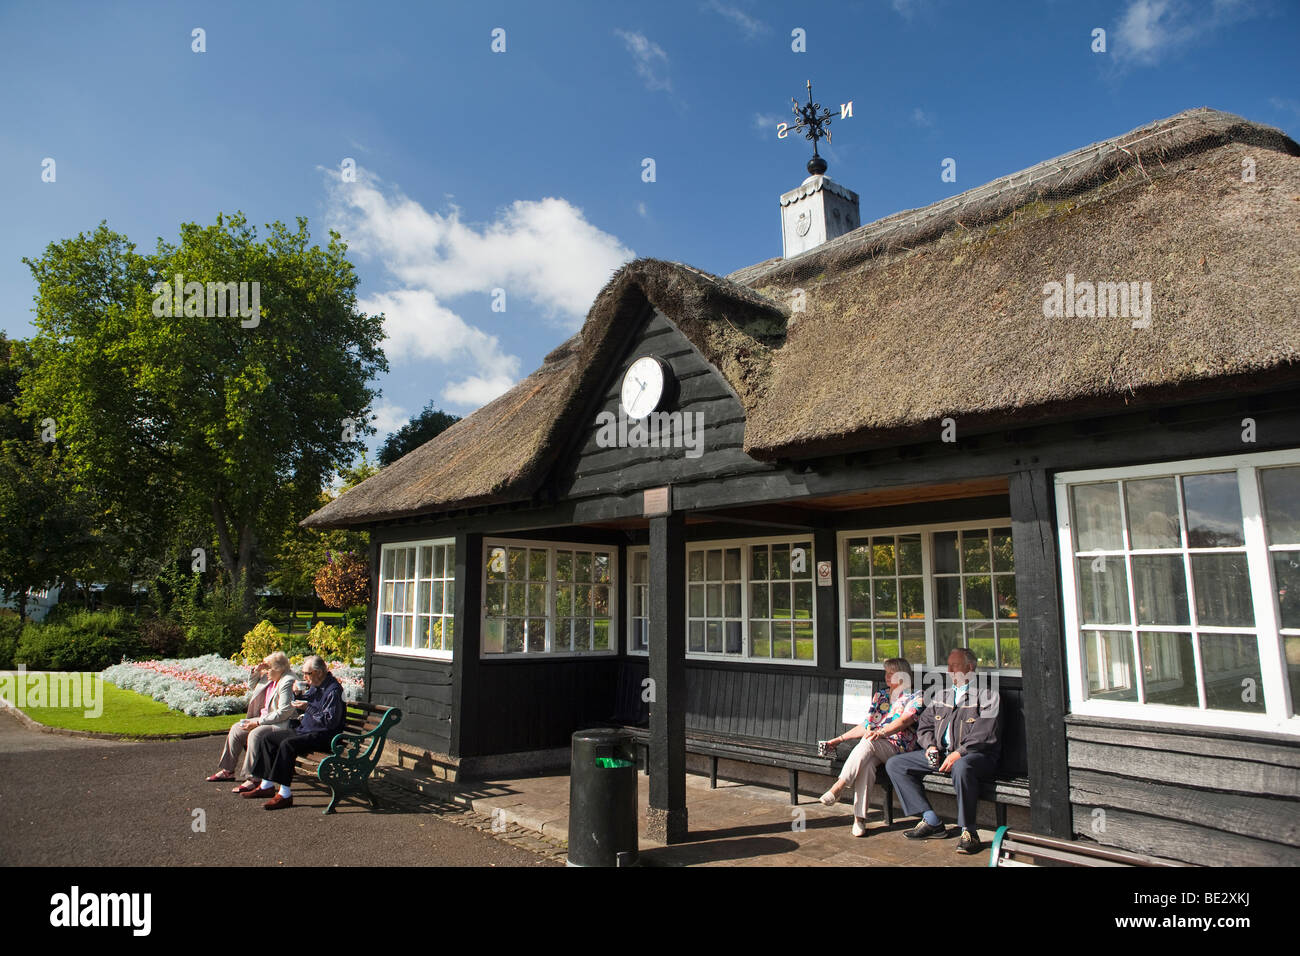 UK, England, Staffordshire, Stafford, Victoria Park, bowls pavilion retired people sat watching game in sunshine Stock Photo